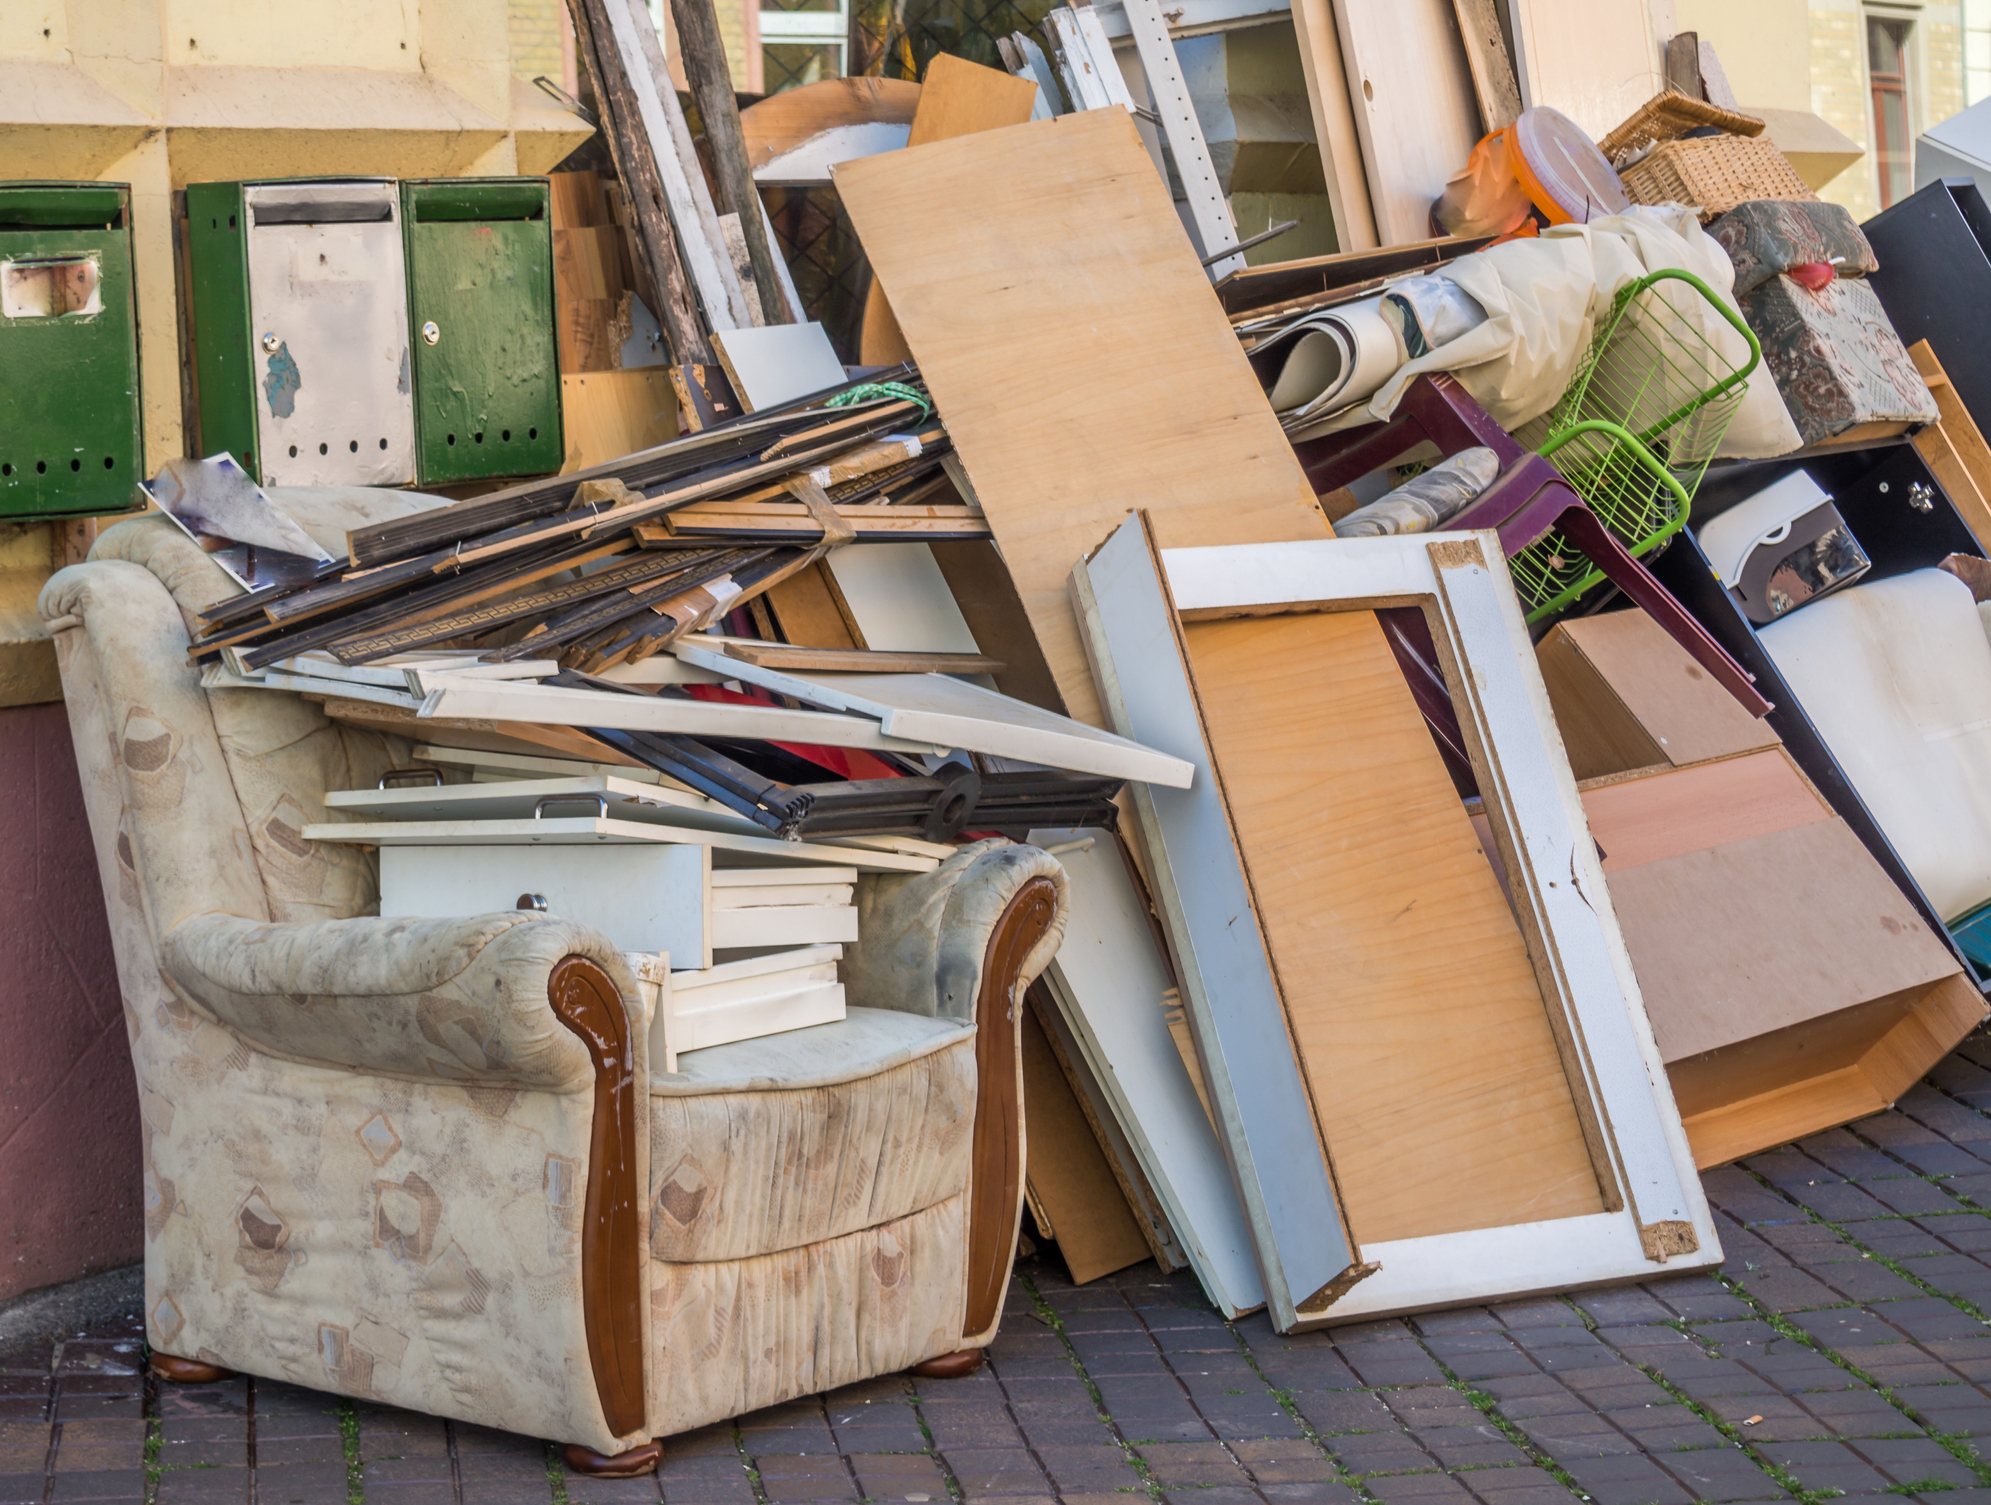 Estate & House Cleanouts in Maryland & DC